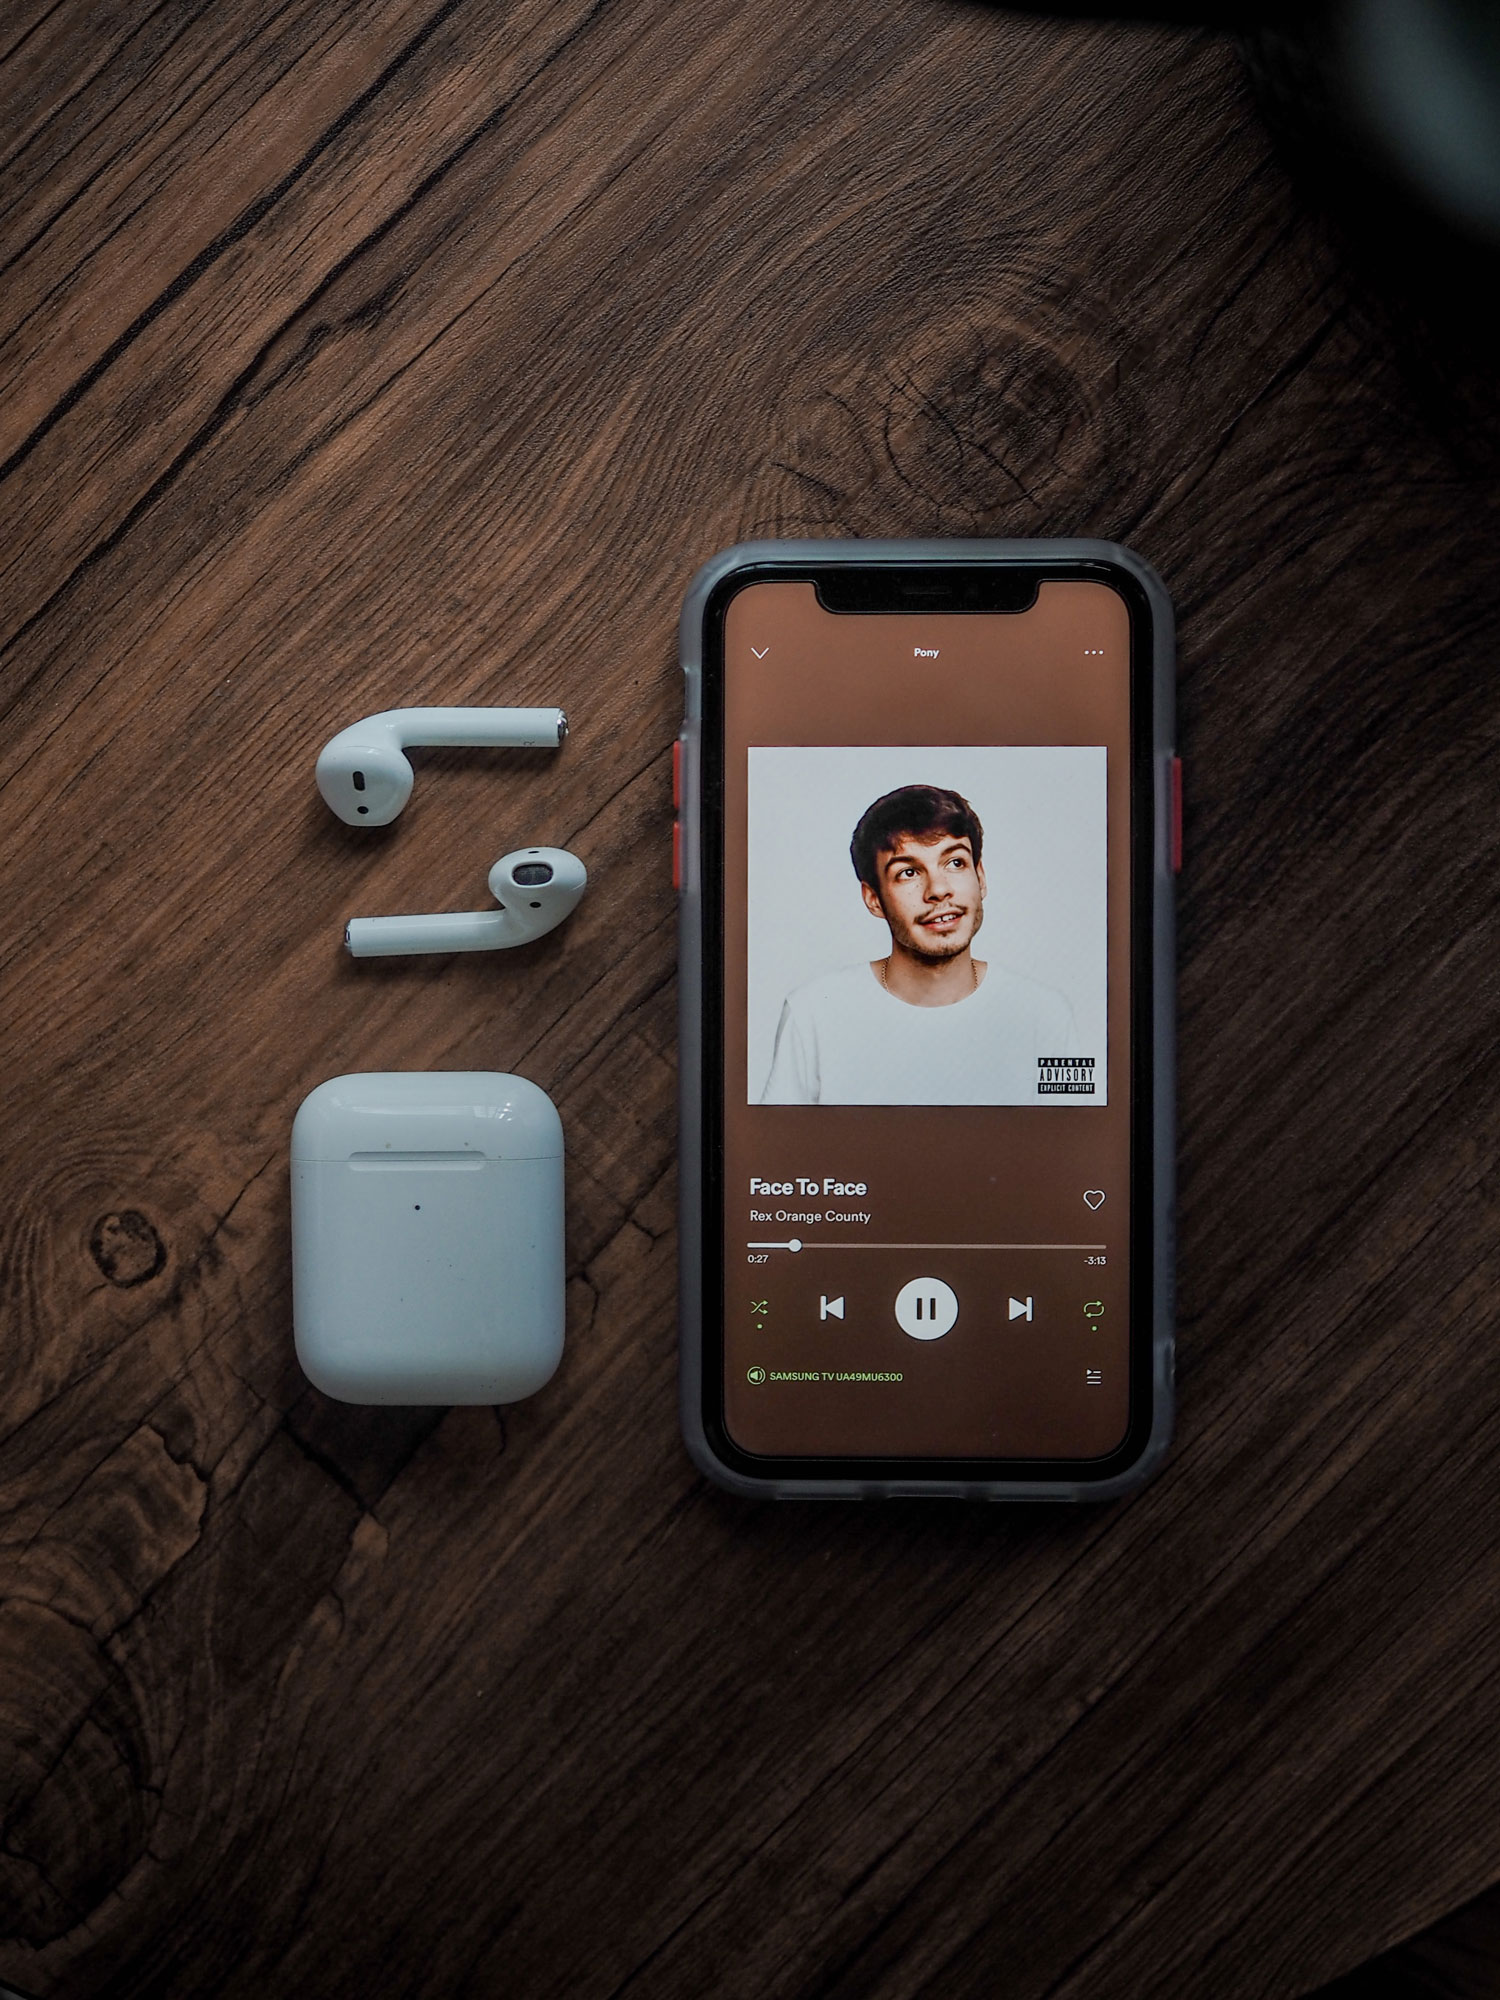 Download Free Iphone Mockup With Airpods On A Wooden Table Free Mockup Download